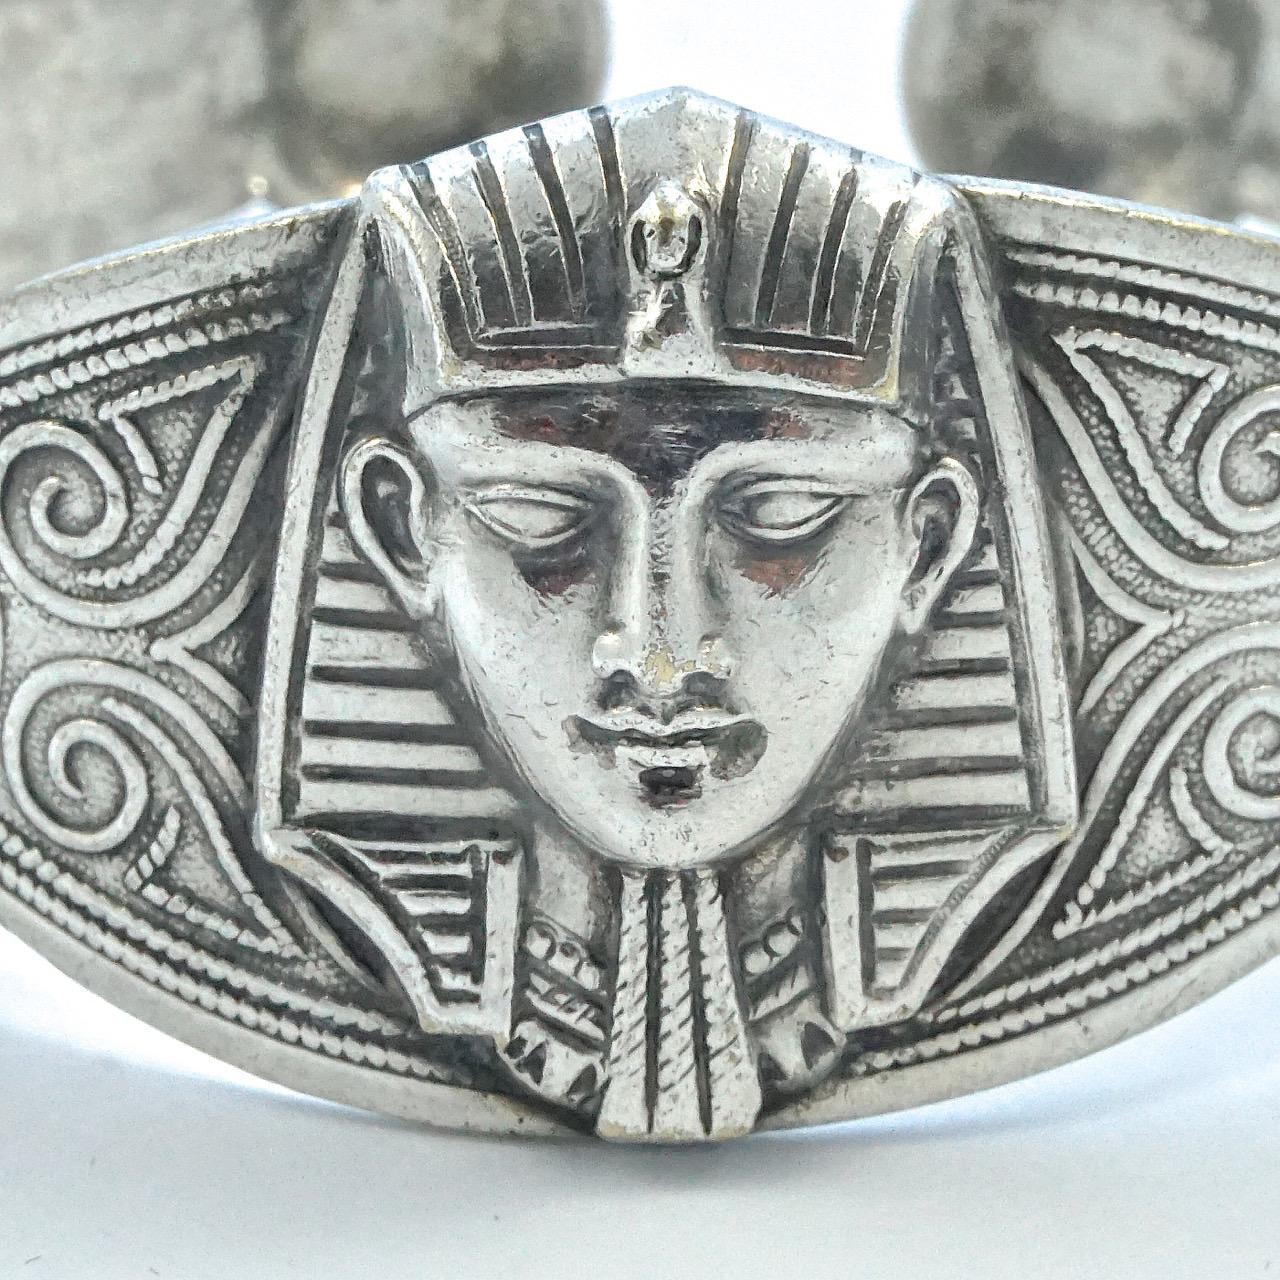 Wonderful Egyptian Revival silver bangle, featuring a centre pharaoh flanked by two elephants, with ornate decoration to the band. Tested for silver. It is probably of North African origin, as it has a stamp with the Algerian star and crescent moon.